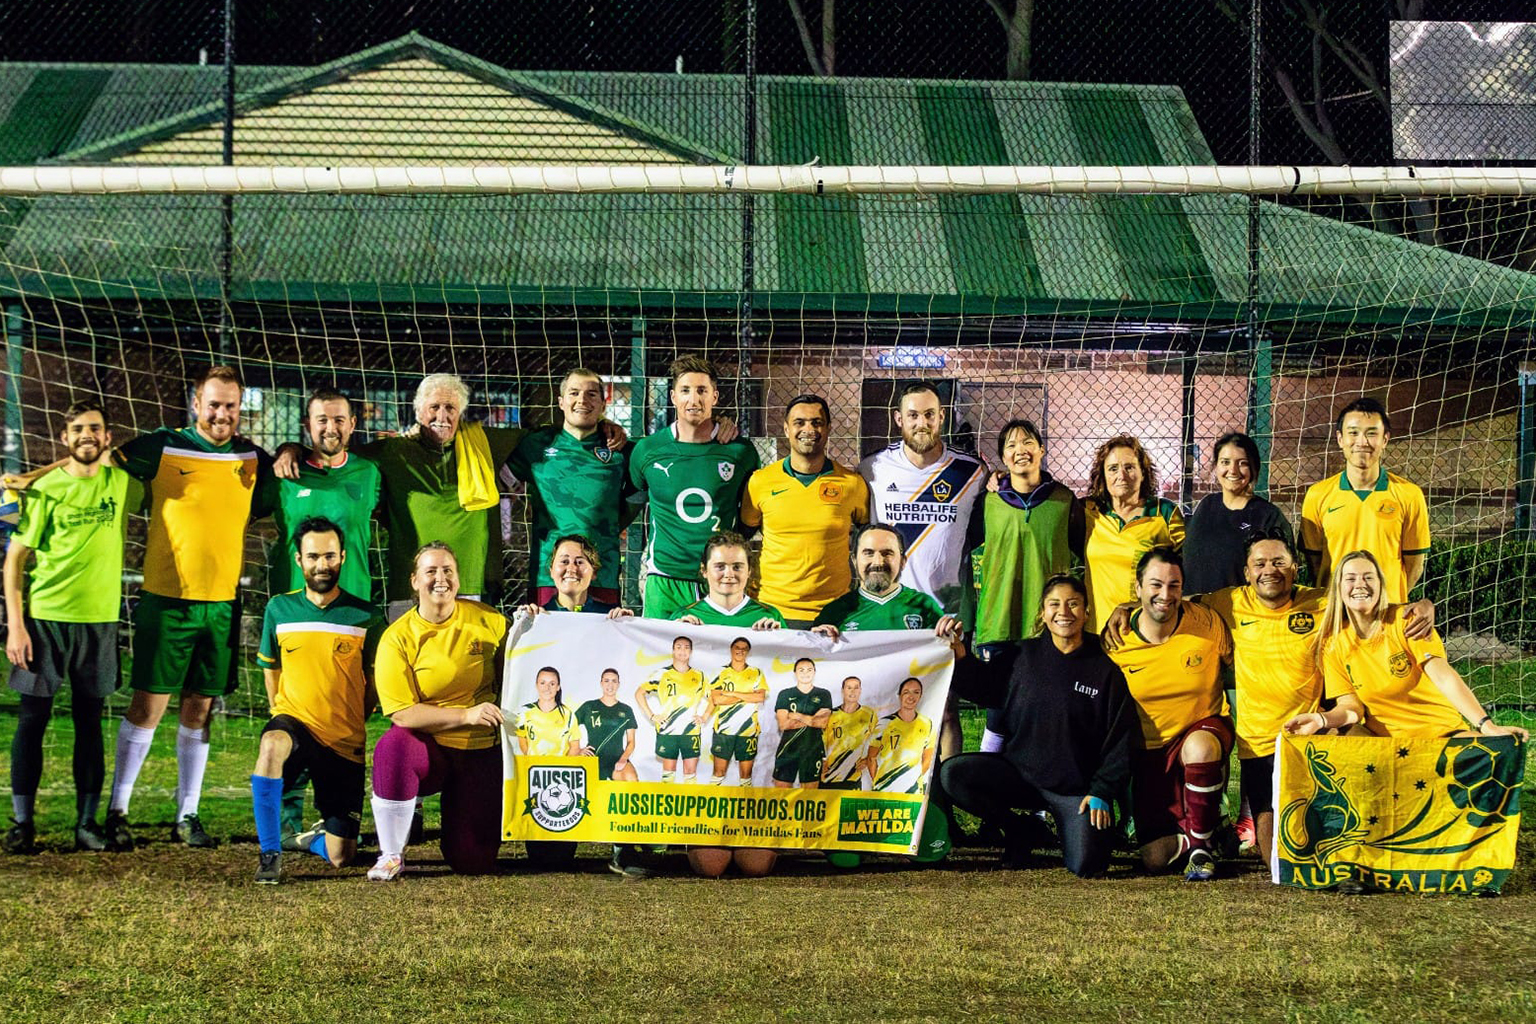 A group of Supporteroos players gathered for a team photo